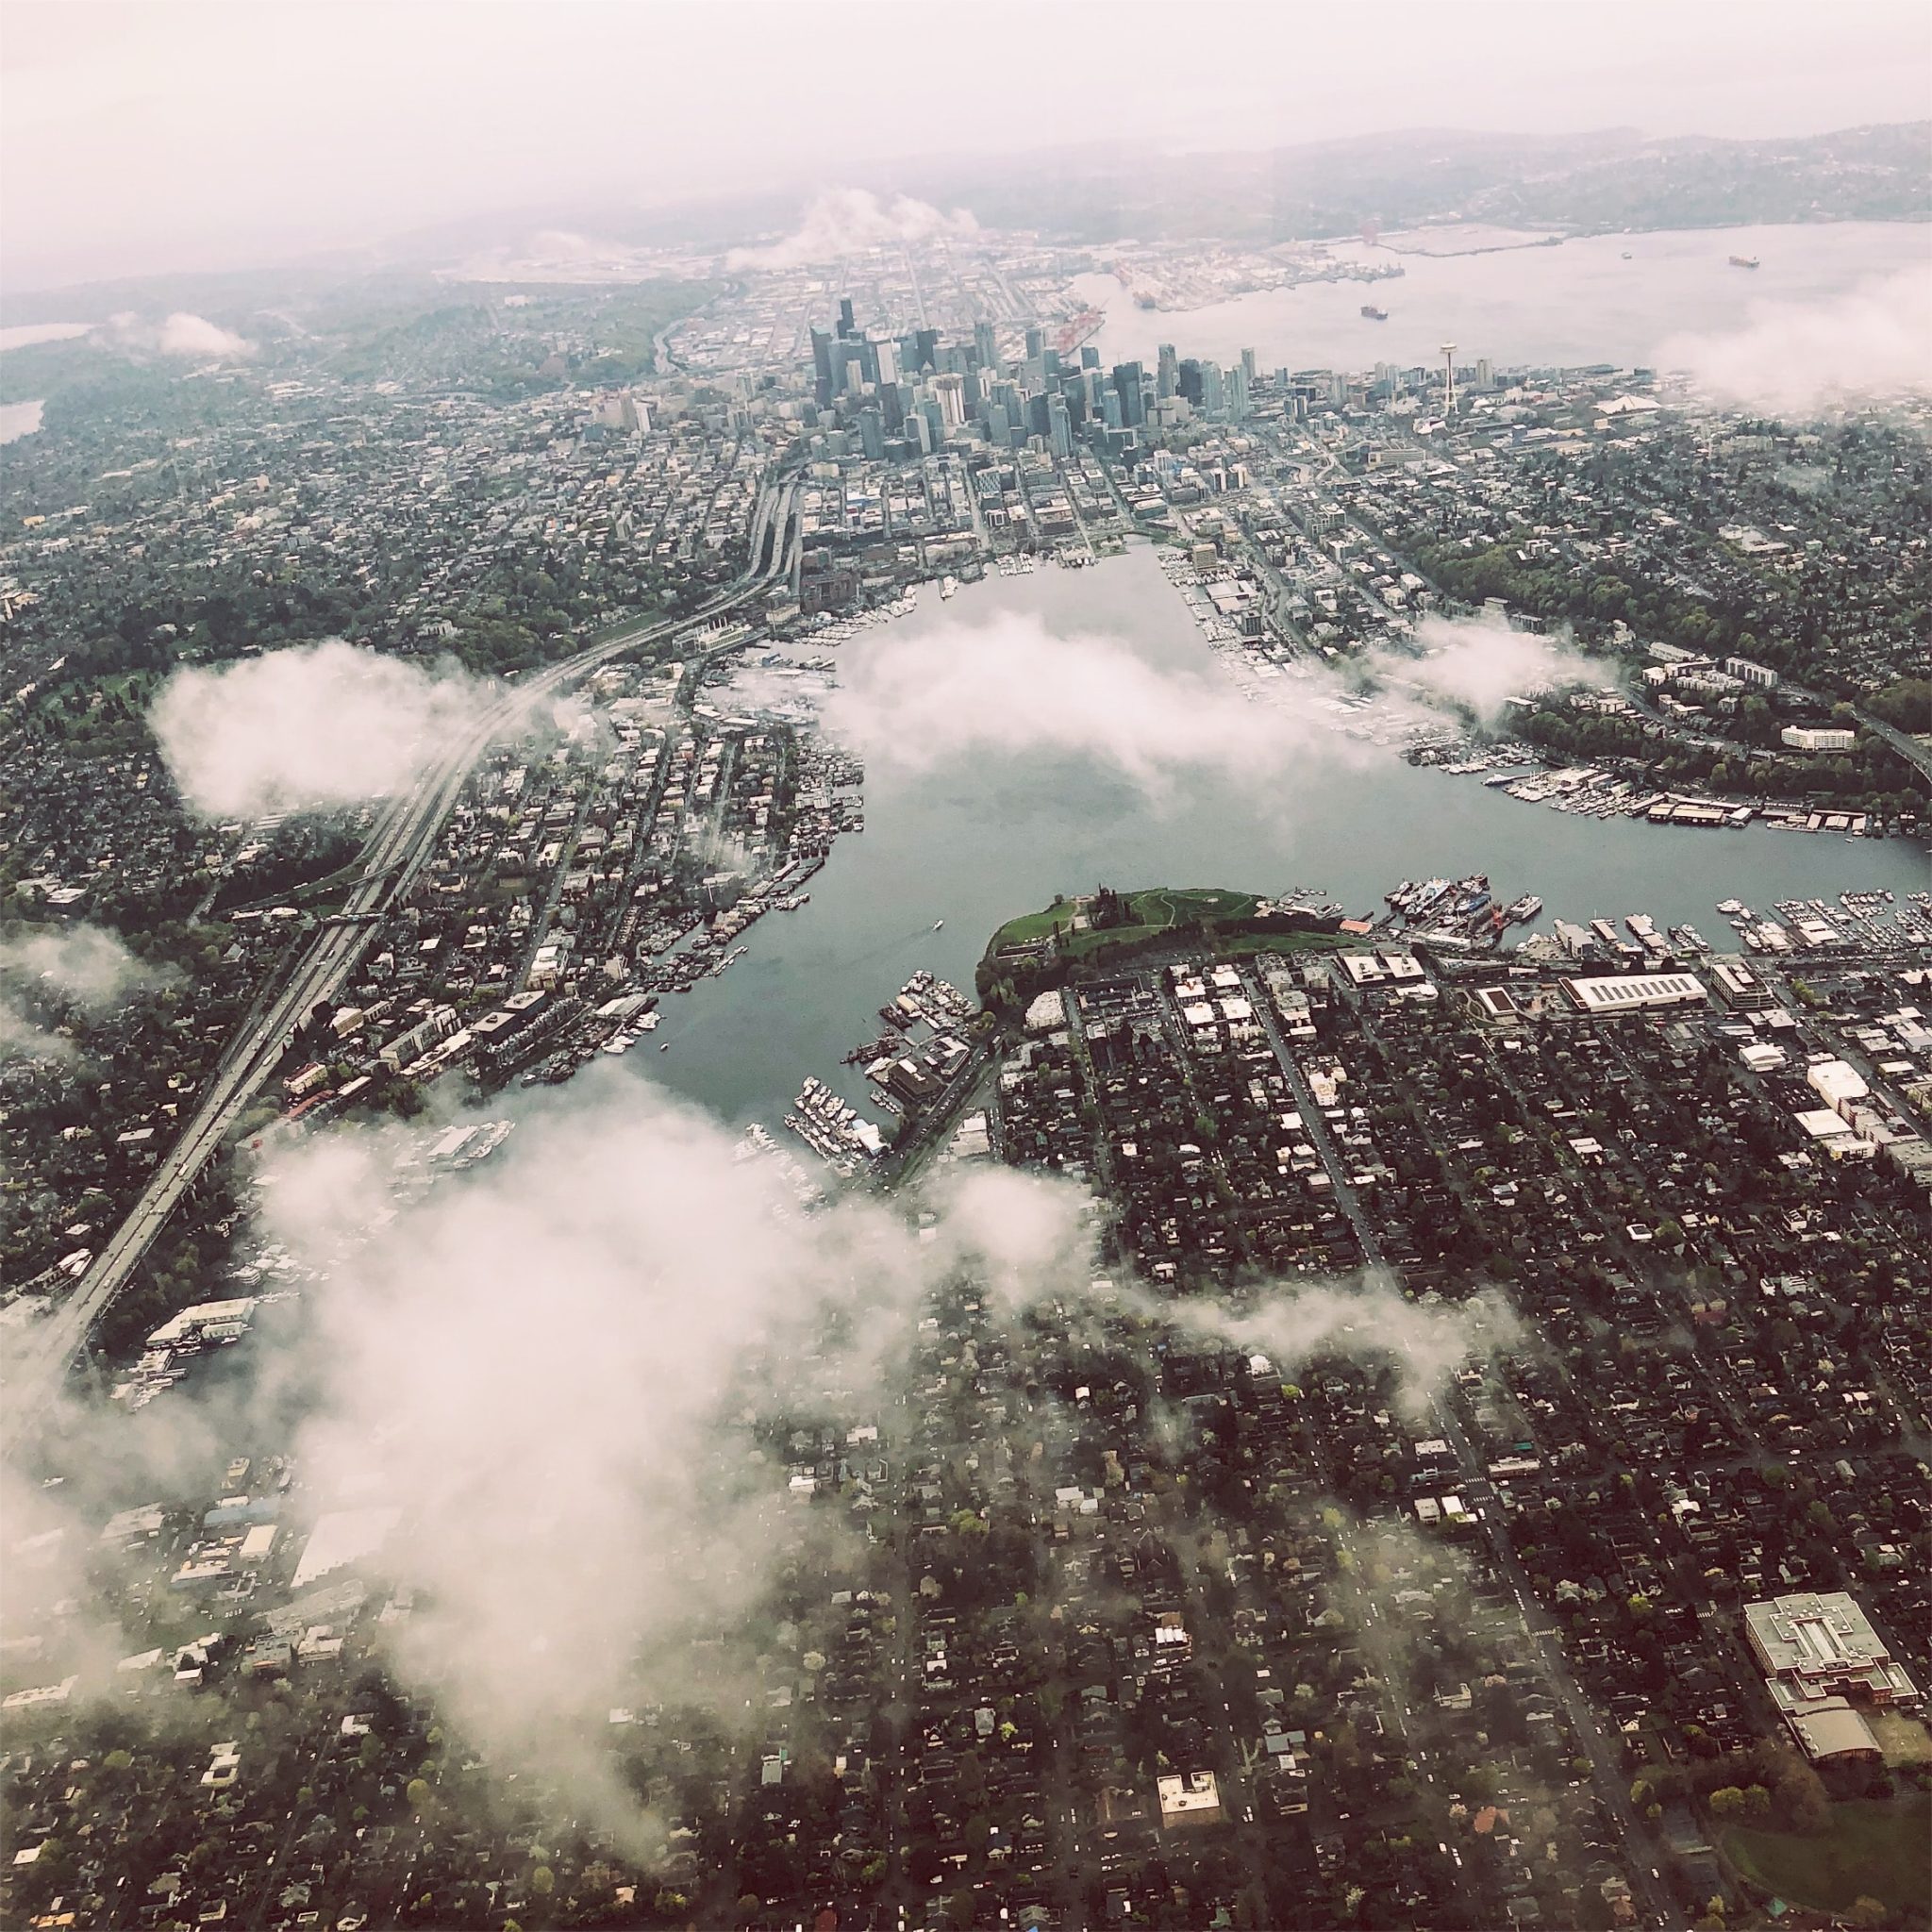 Seattle viewed from above. Photo Credit: Unsplash.